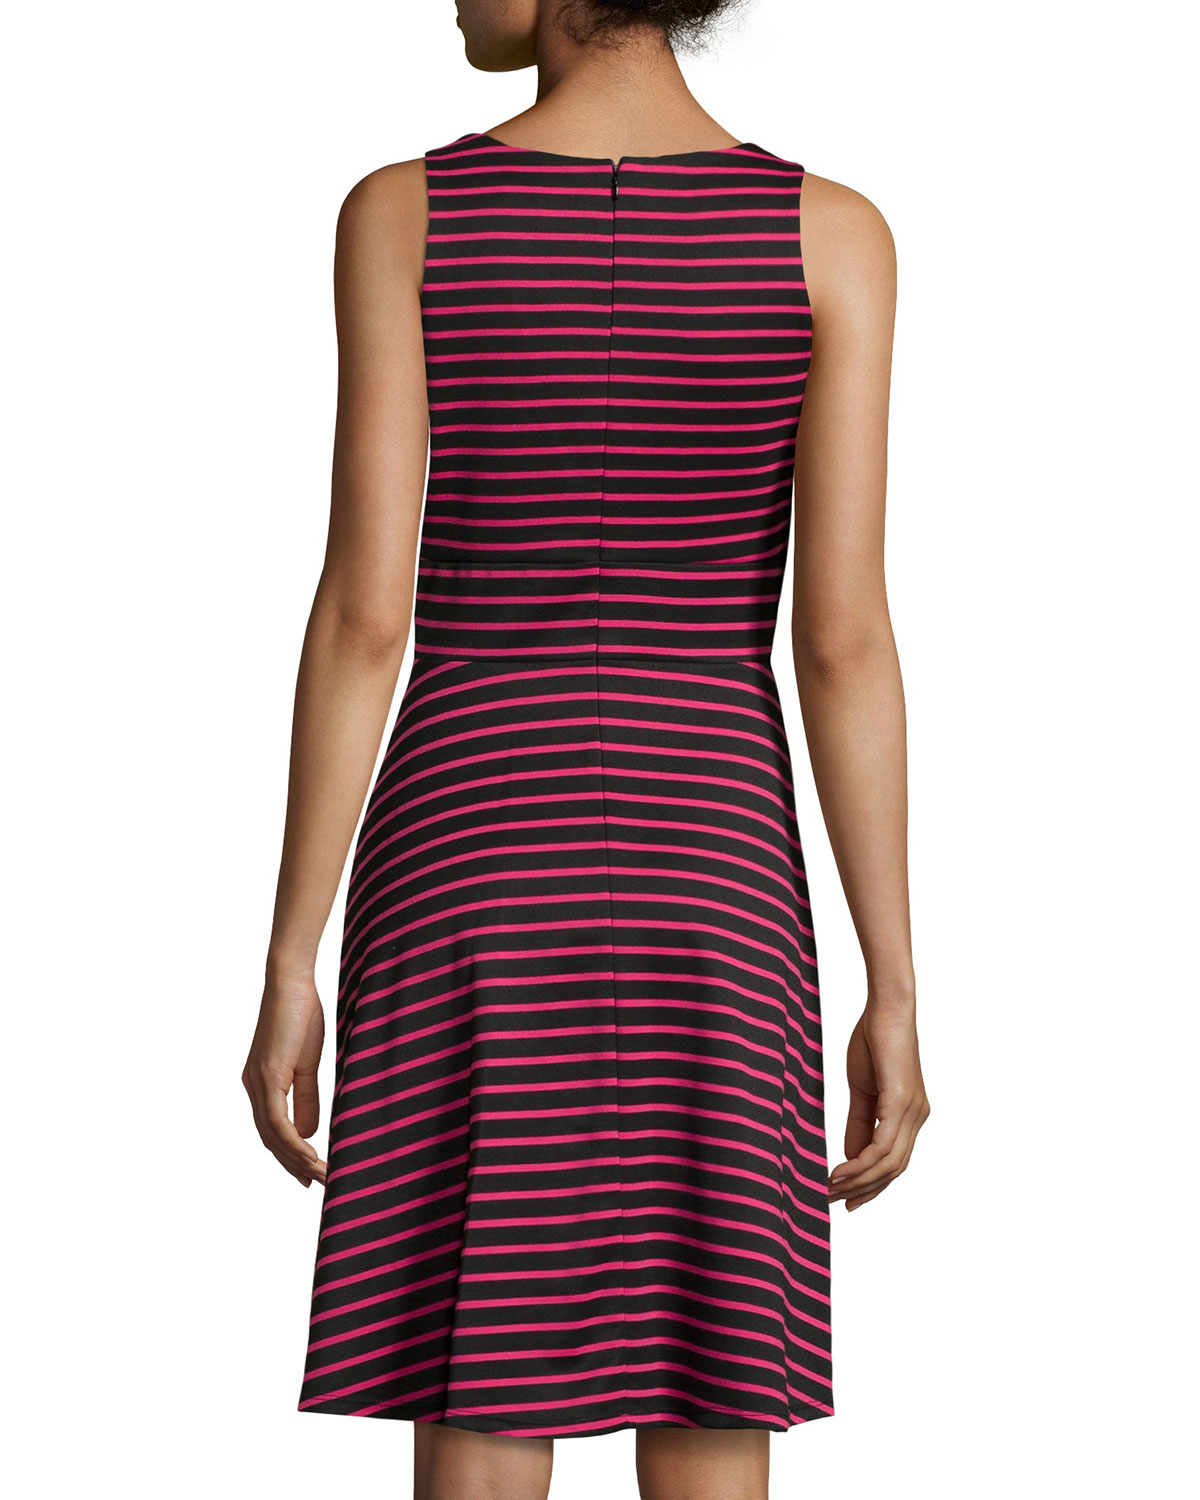 Donna ricco Striped Sleeveless Fit-And-Flare Dress in Purple | Lyst